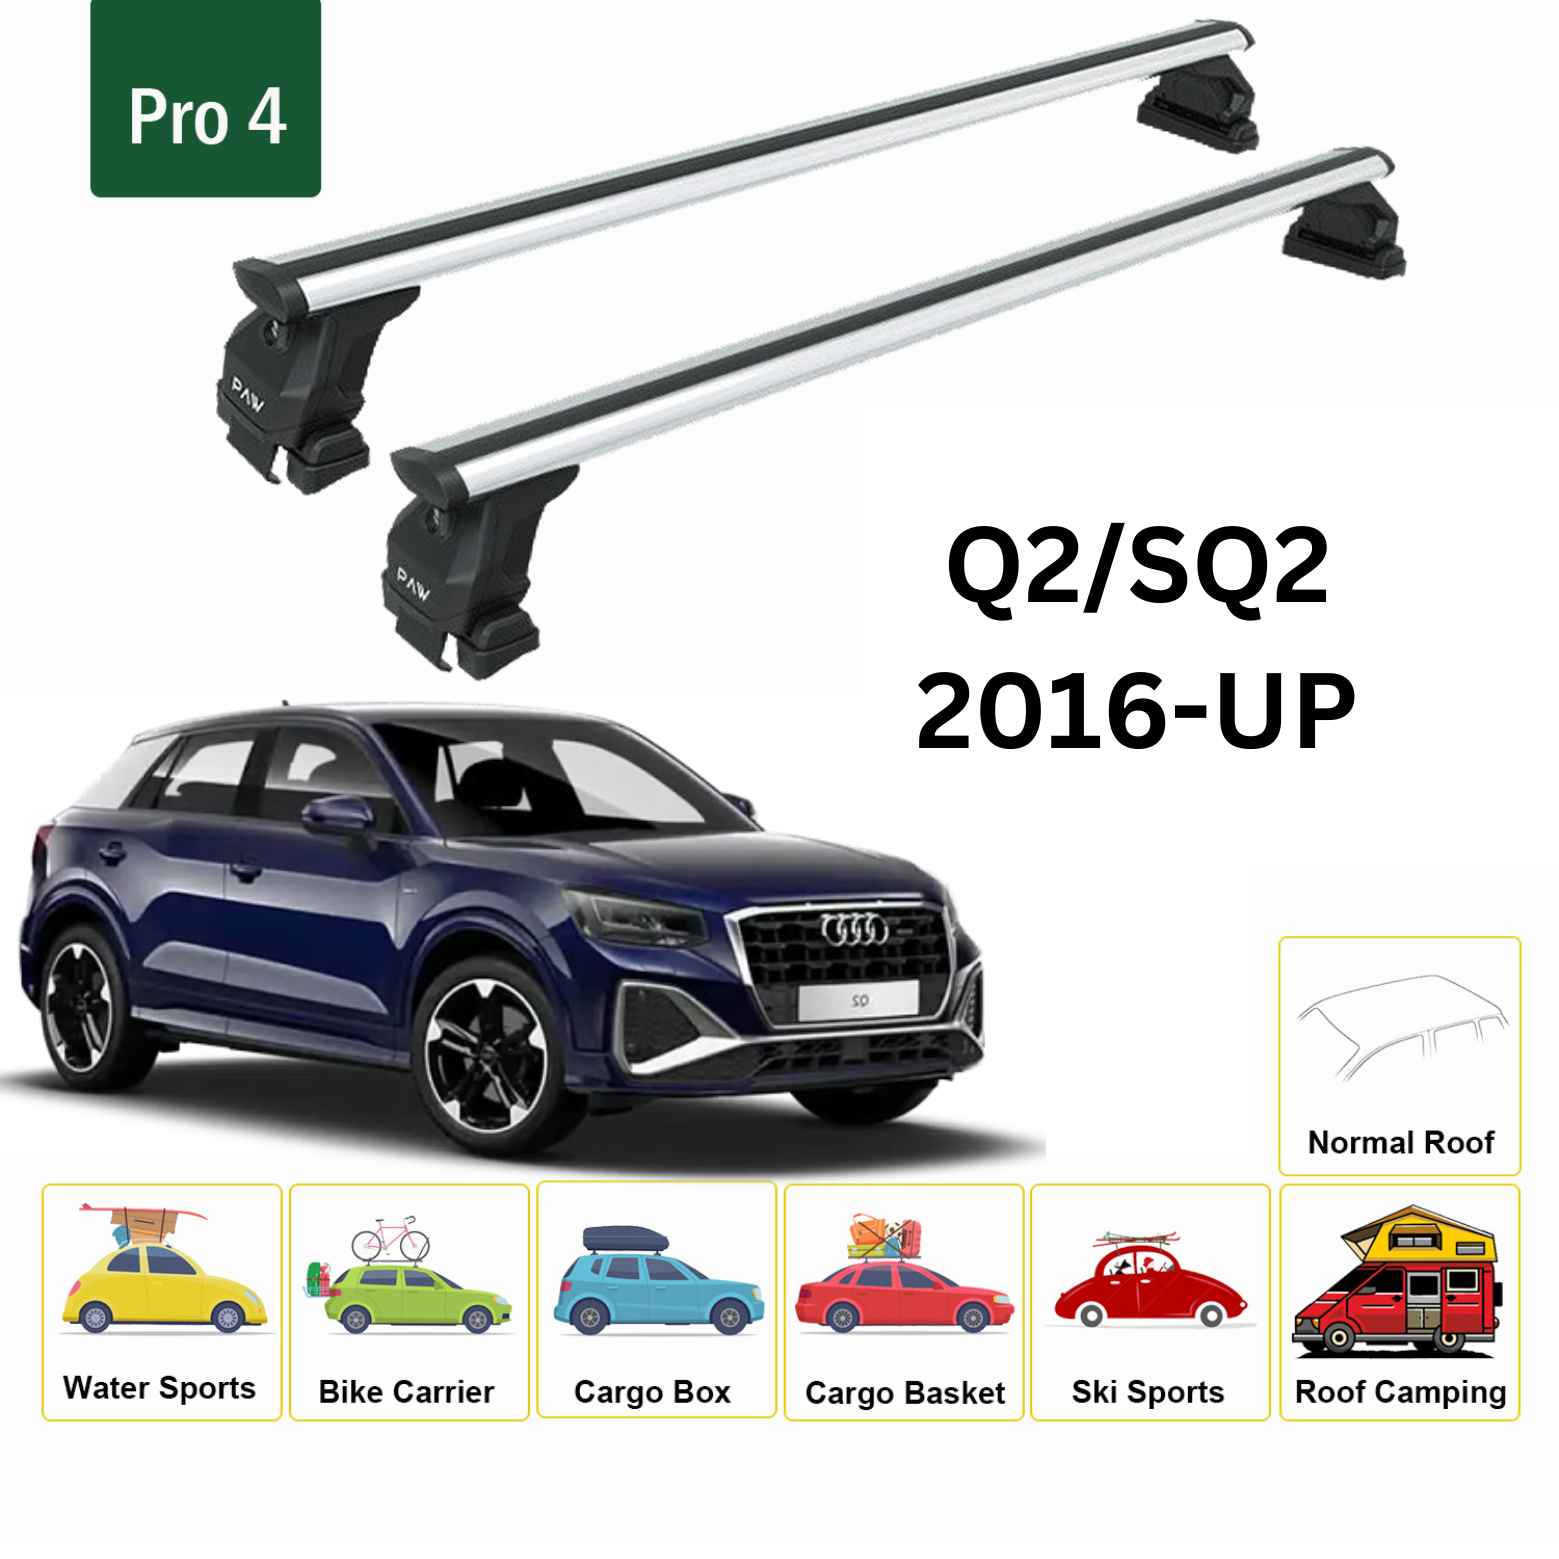 For Audi Q2/SQ2 2016-Up Roof Rack Cross Bars Normal Roof Alu Silver